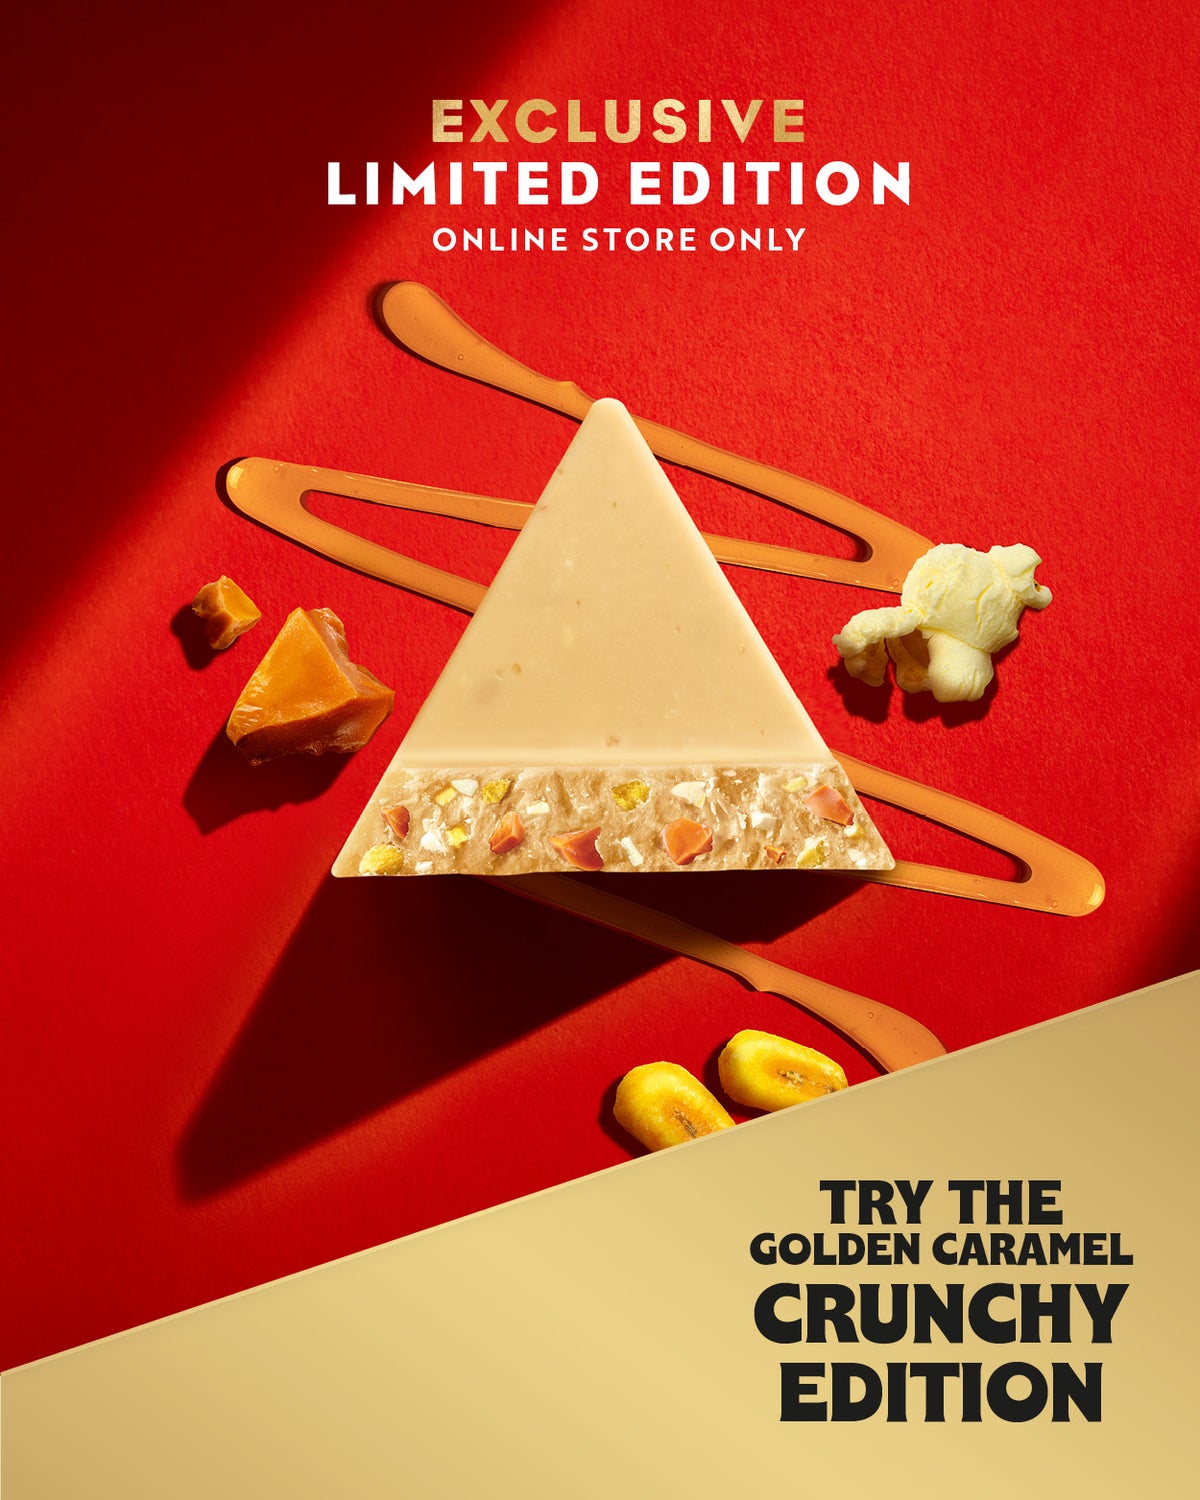 Exclusive limited edition online store only - try the golden caramel crunchy edition